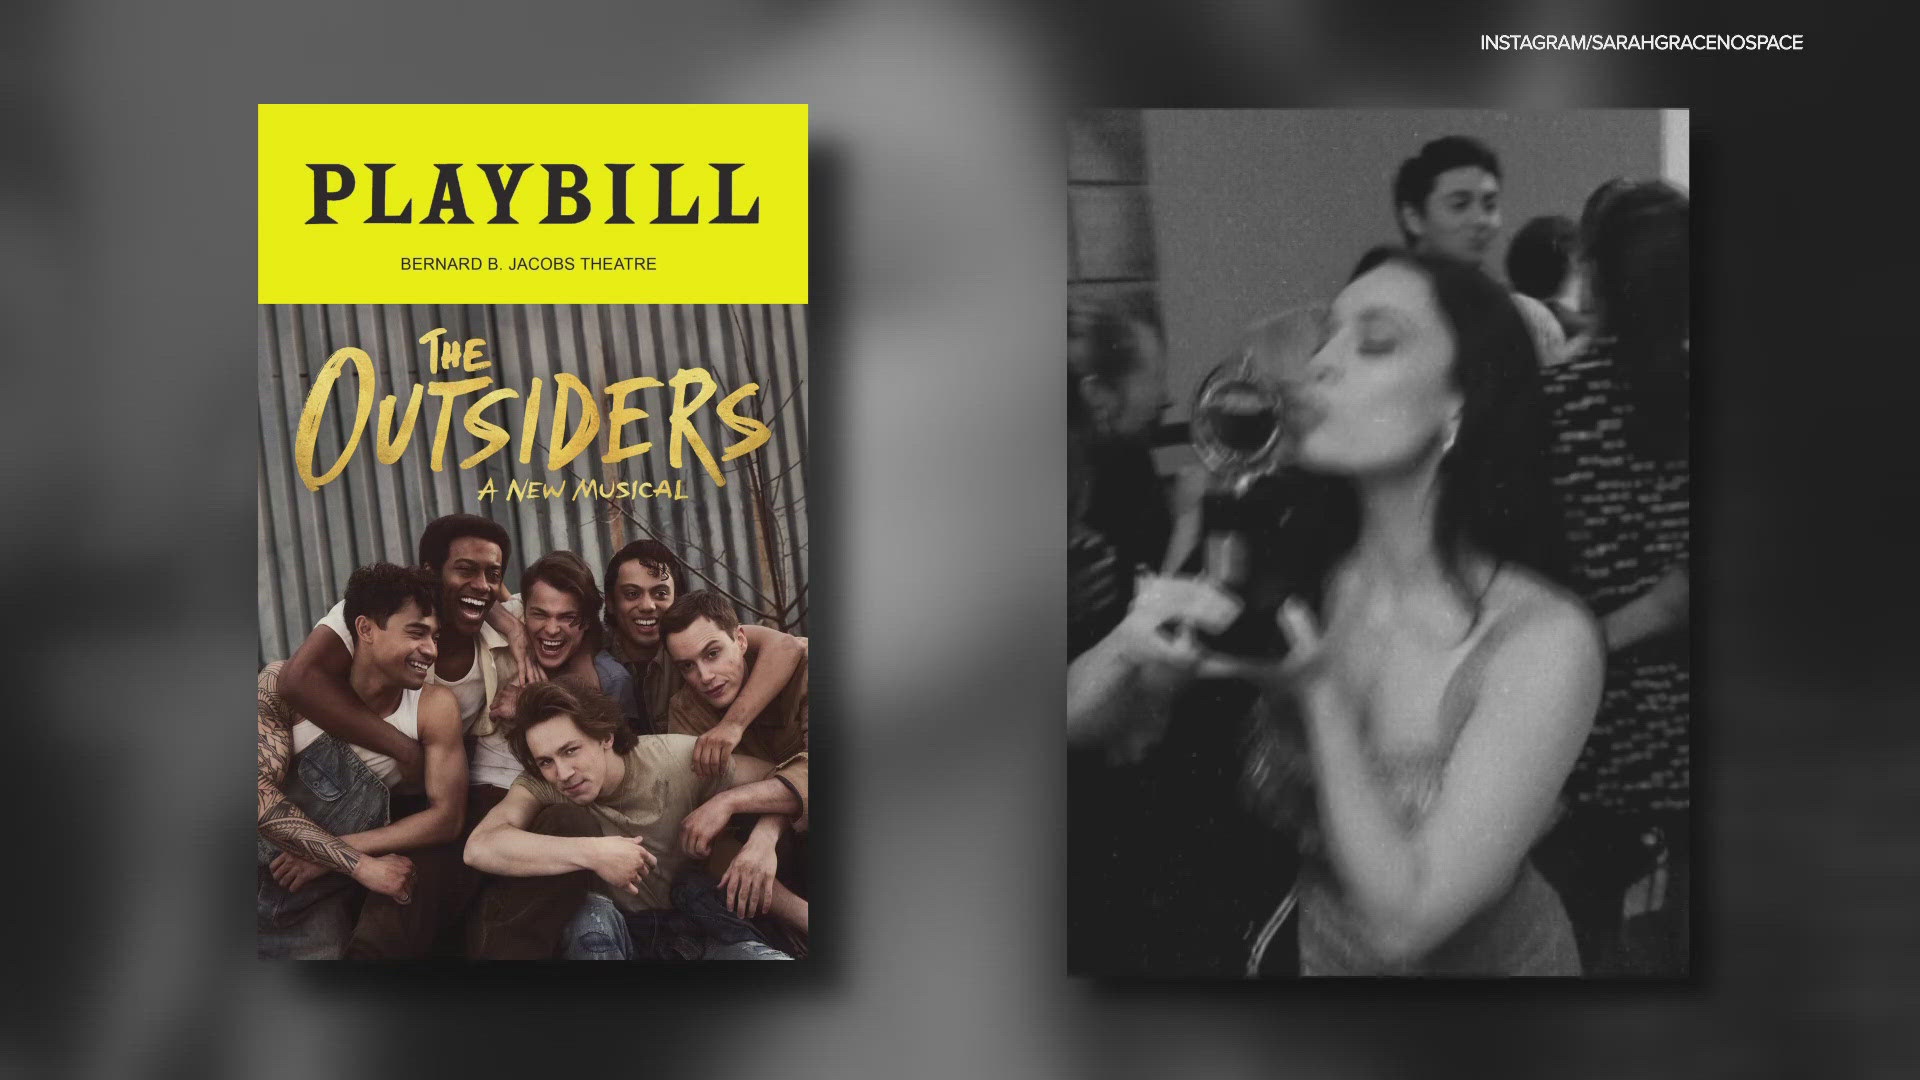 Sarah Grace Mariani is part of the cast for "The Outsiders," which opened on Broadway in April.